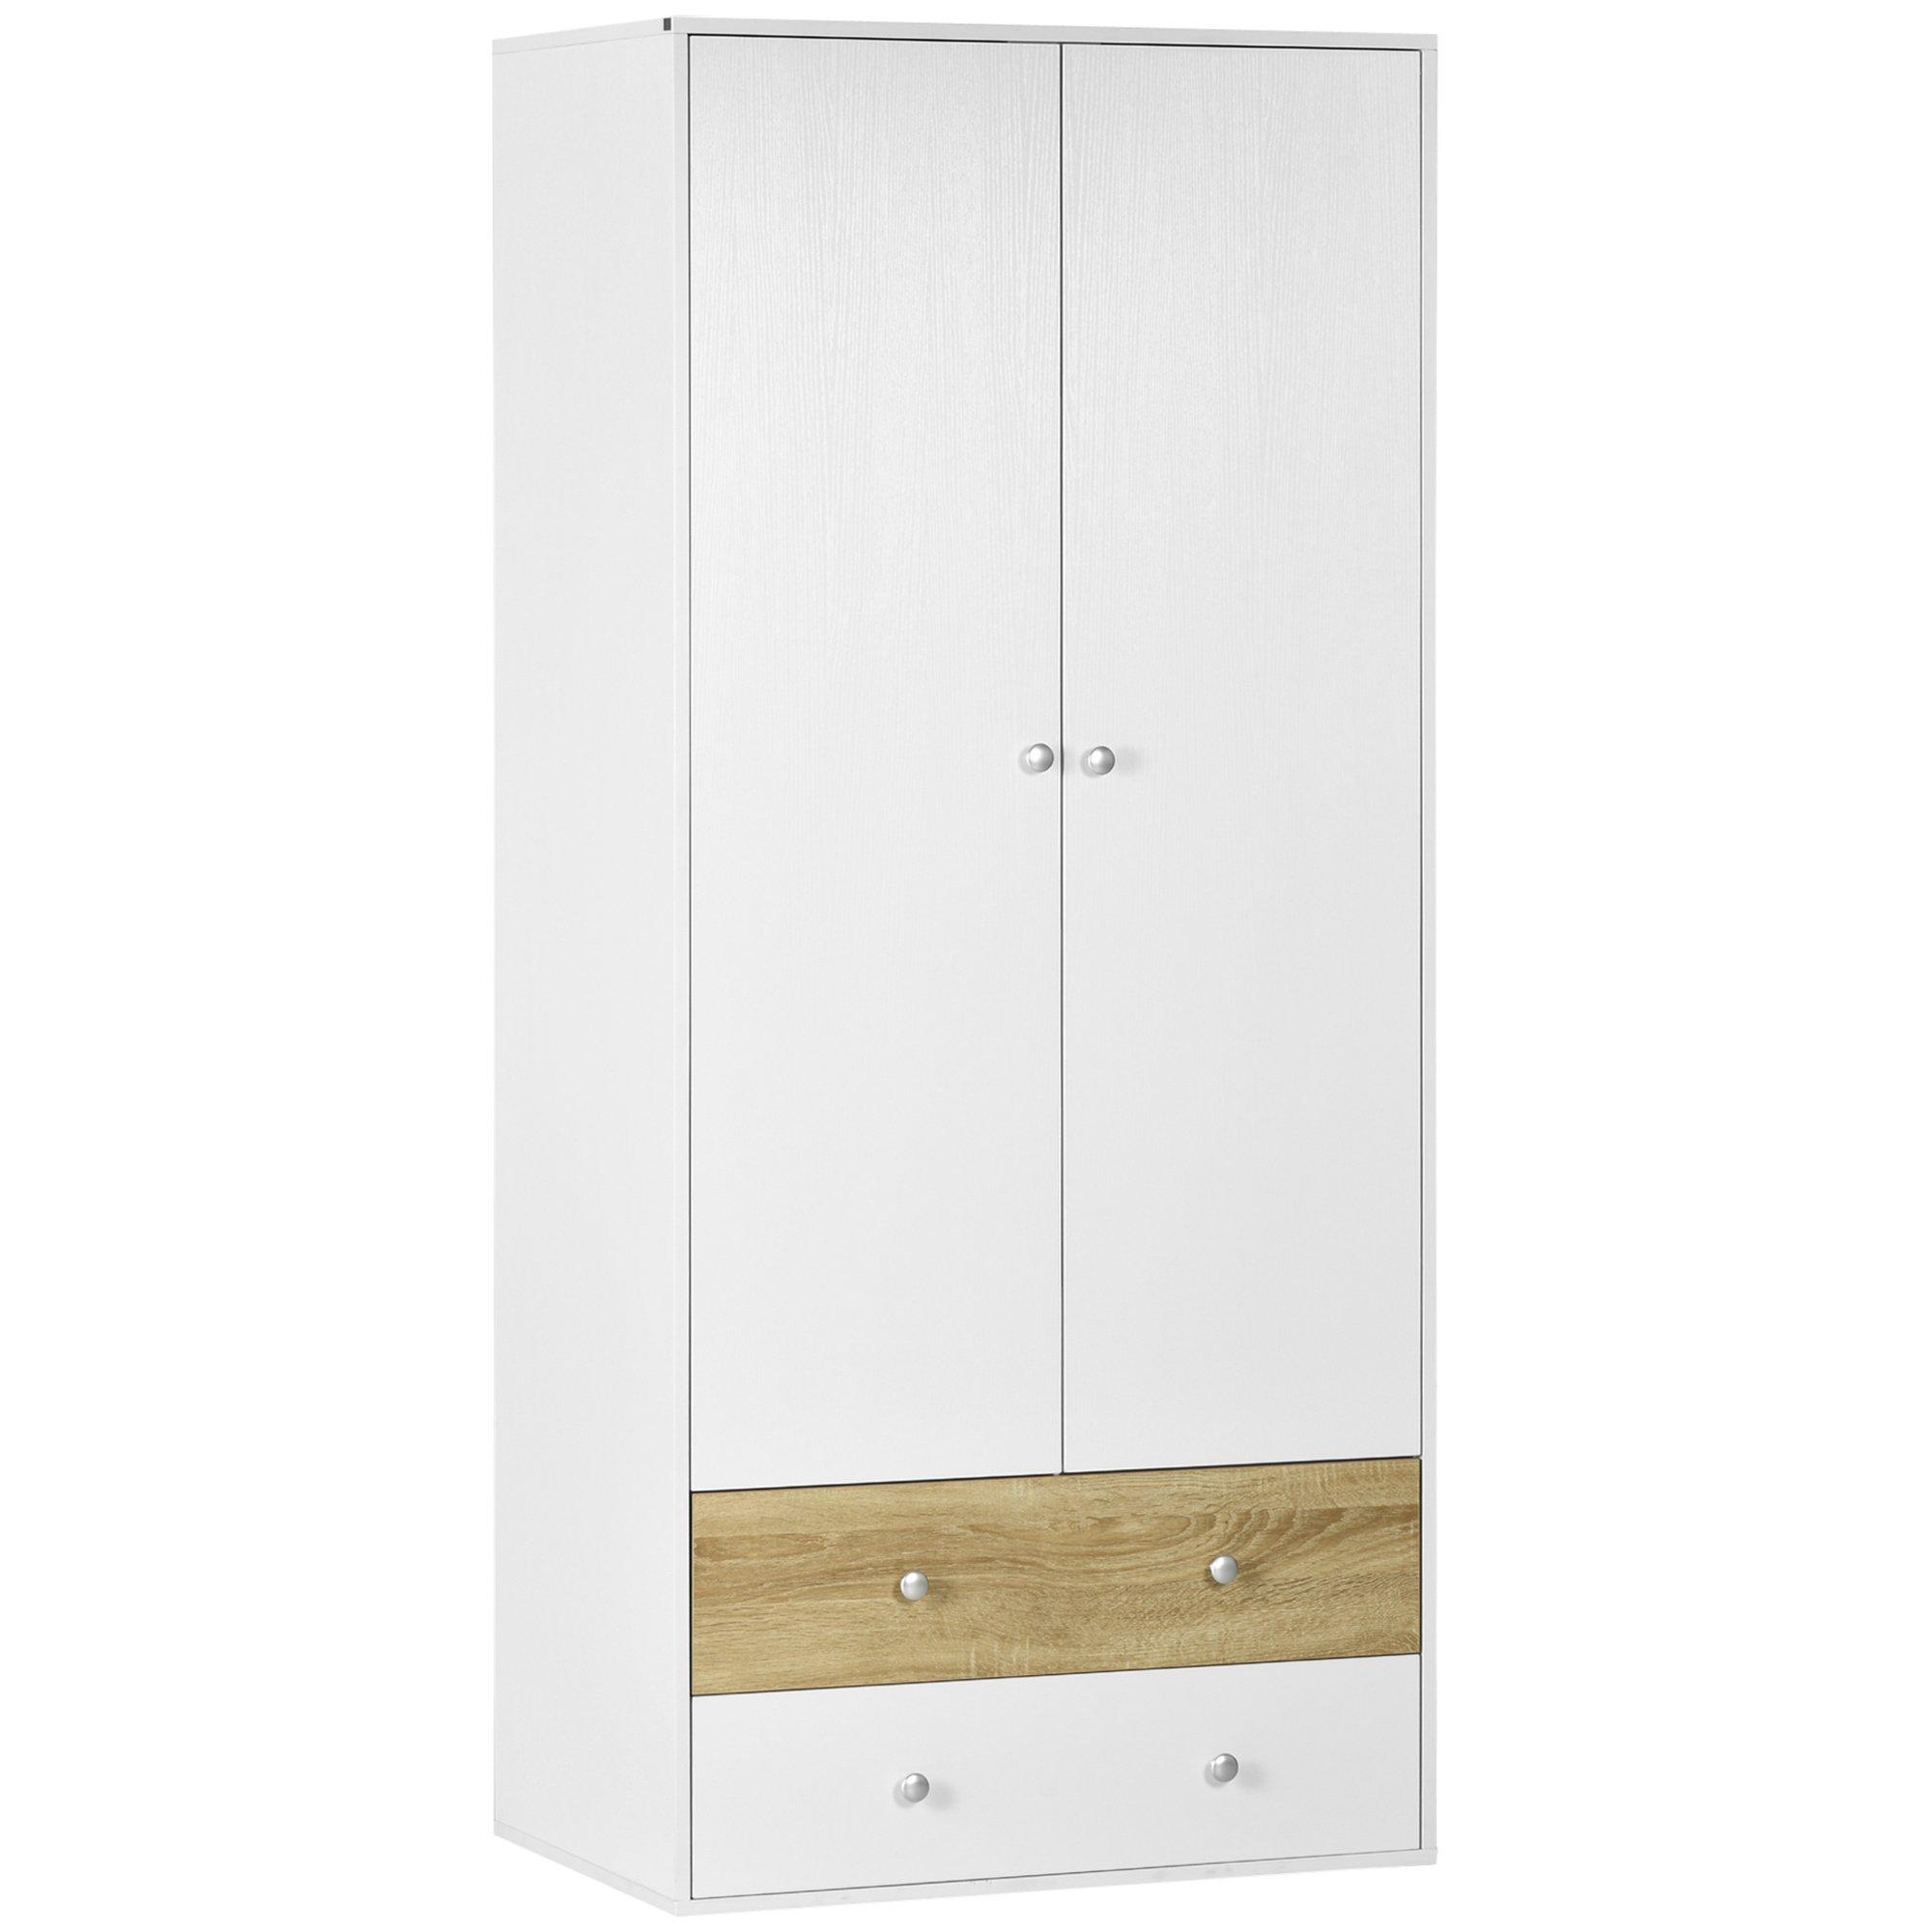 2 Door Wardrobe White Wardrobe with Drawers and Hanging Rod Bedroom